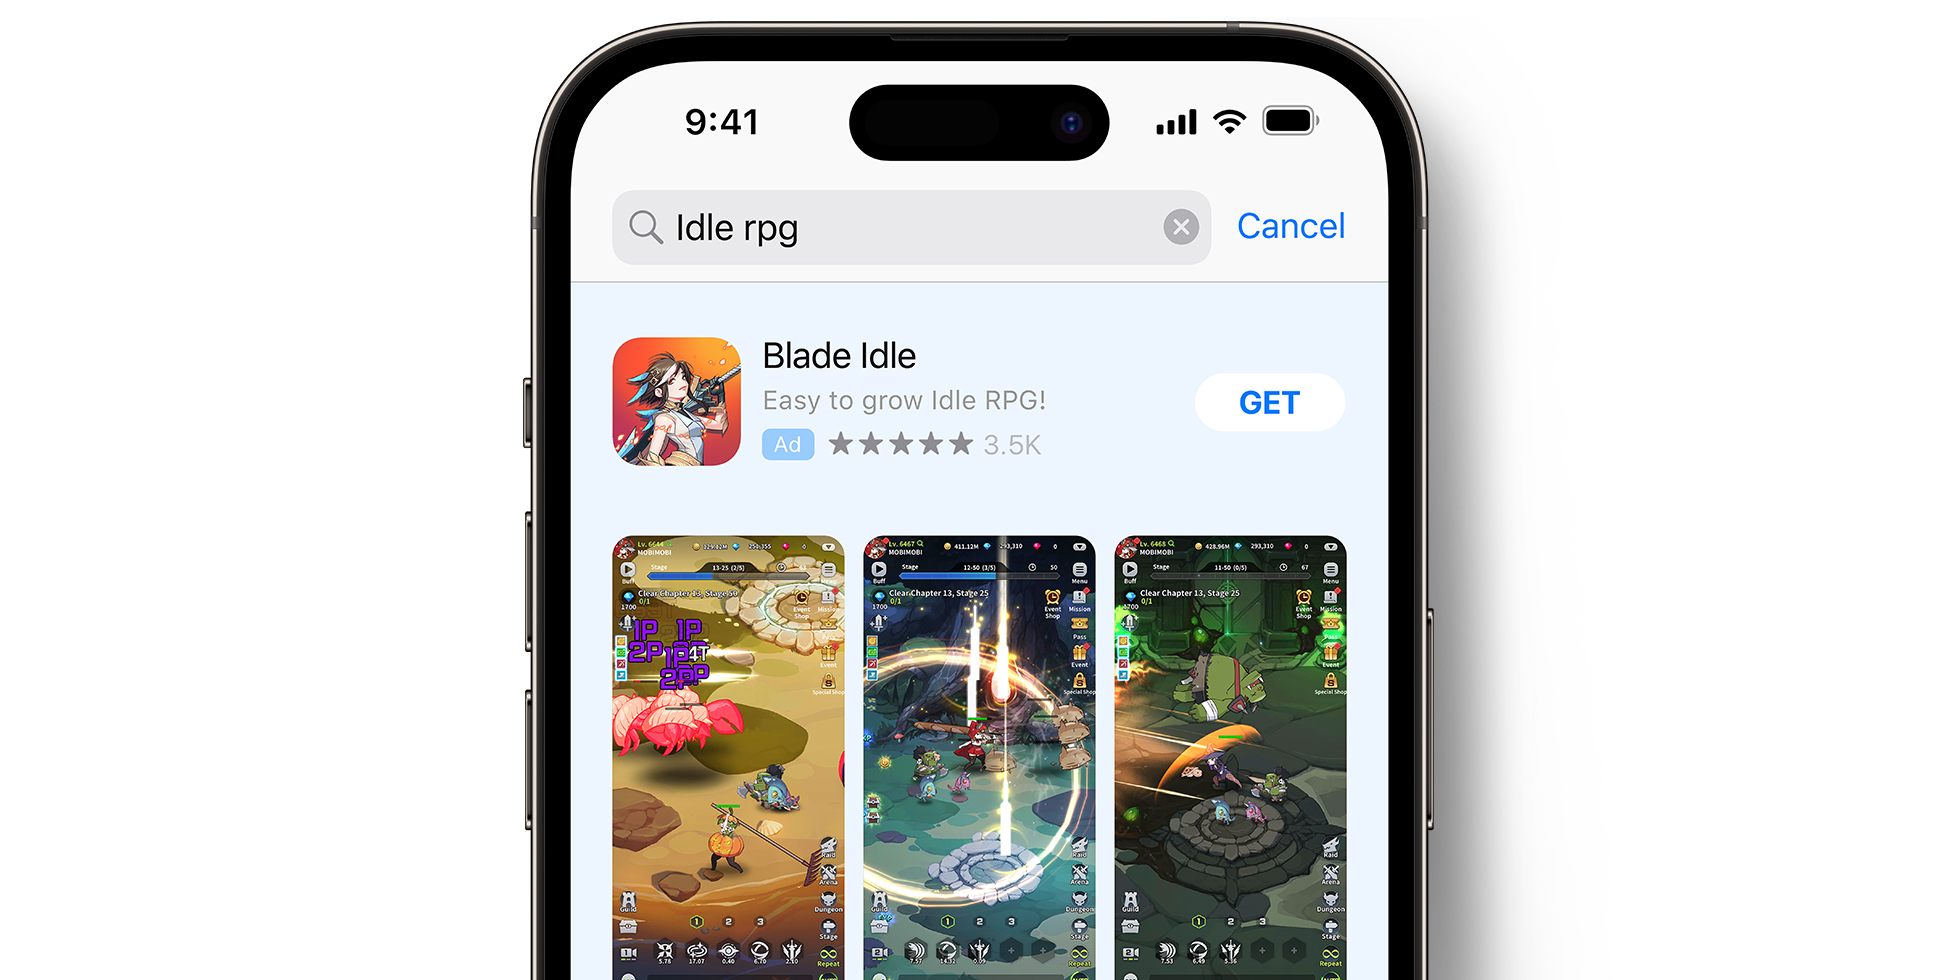 Blade Idle ad on the App Store 